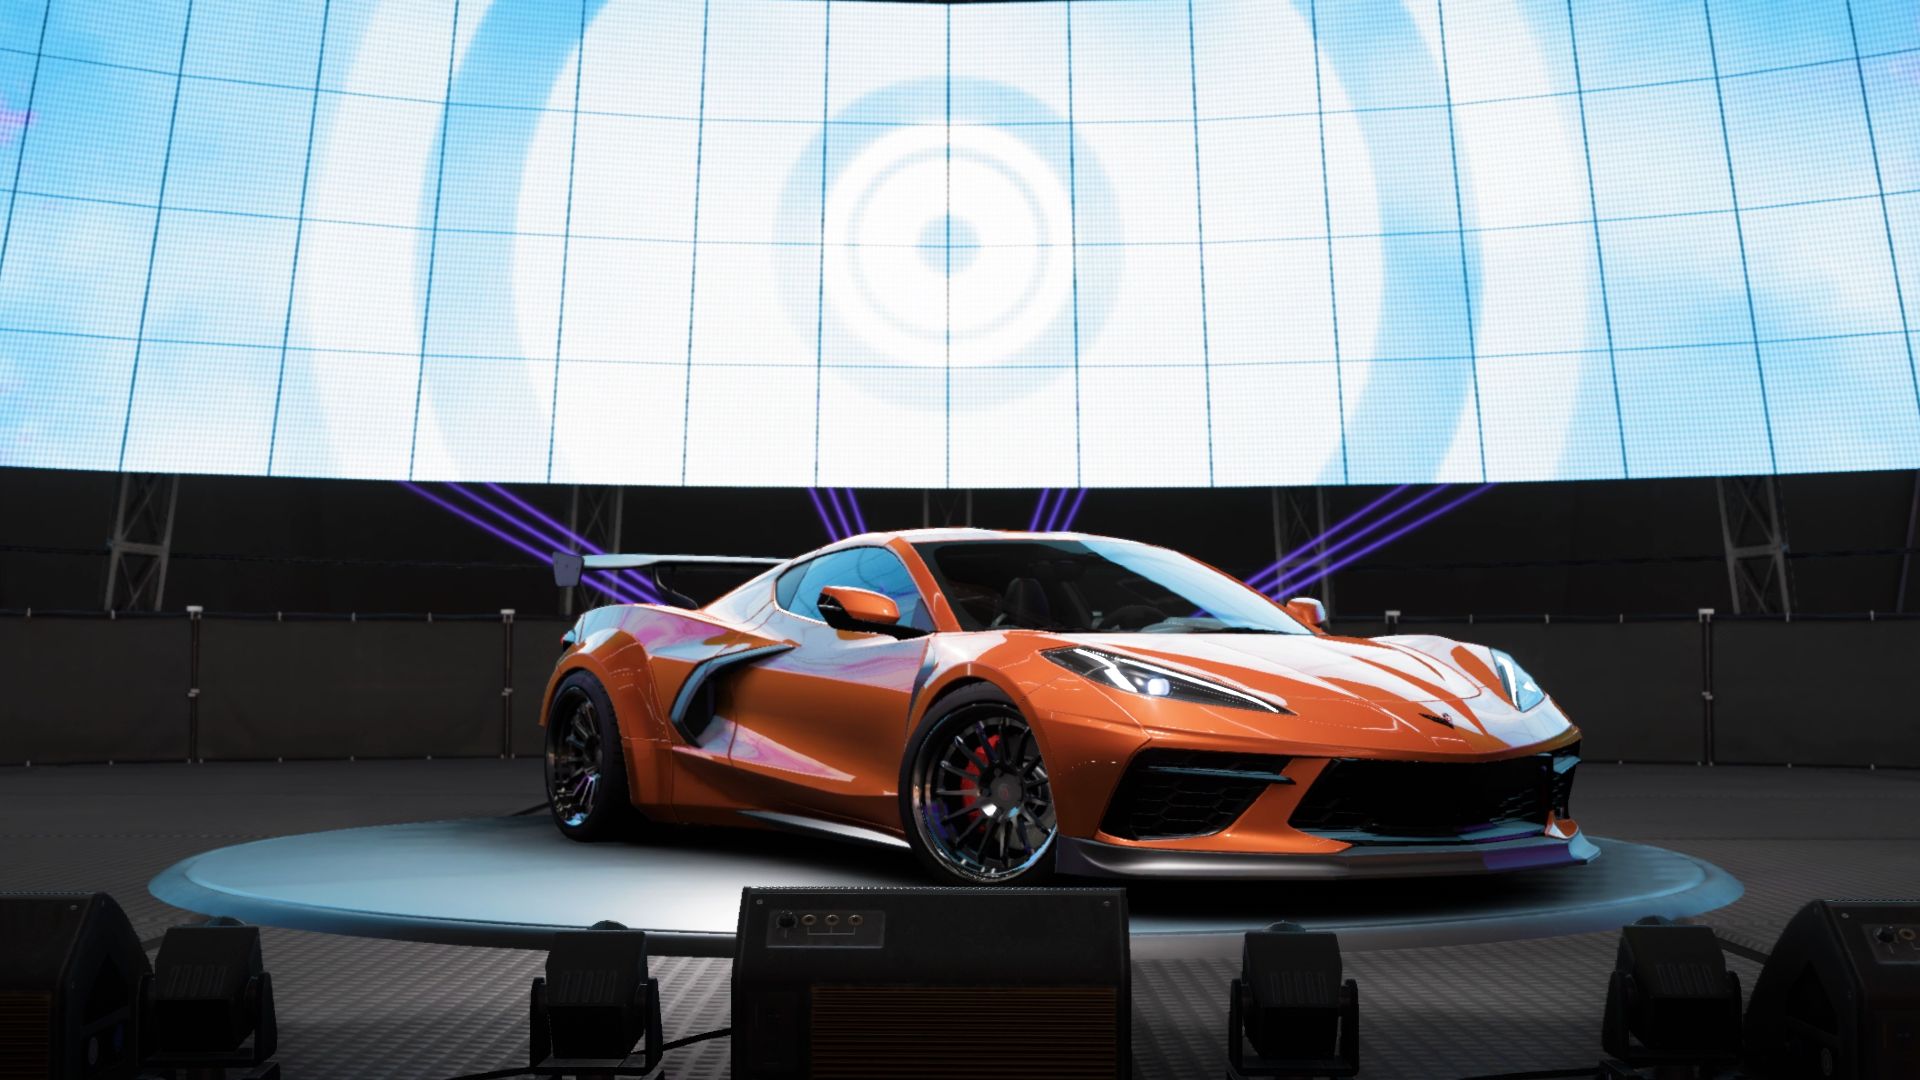 Forza Horizon 5 devs working on fixes for wheels, EventLab, Festival Playlist, more